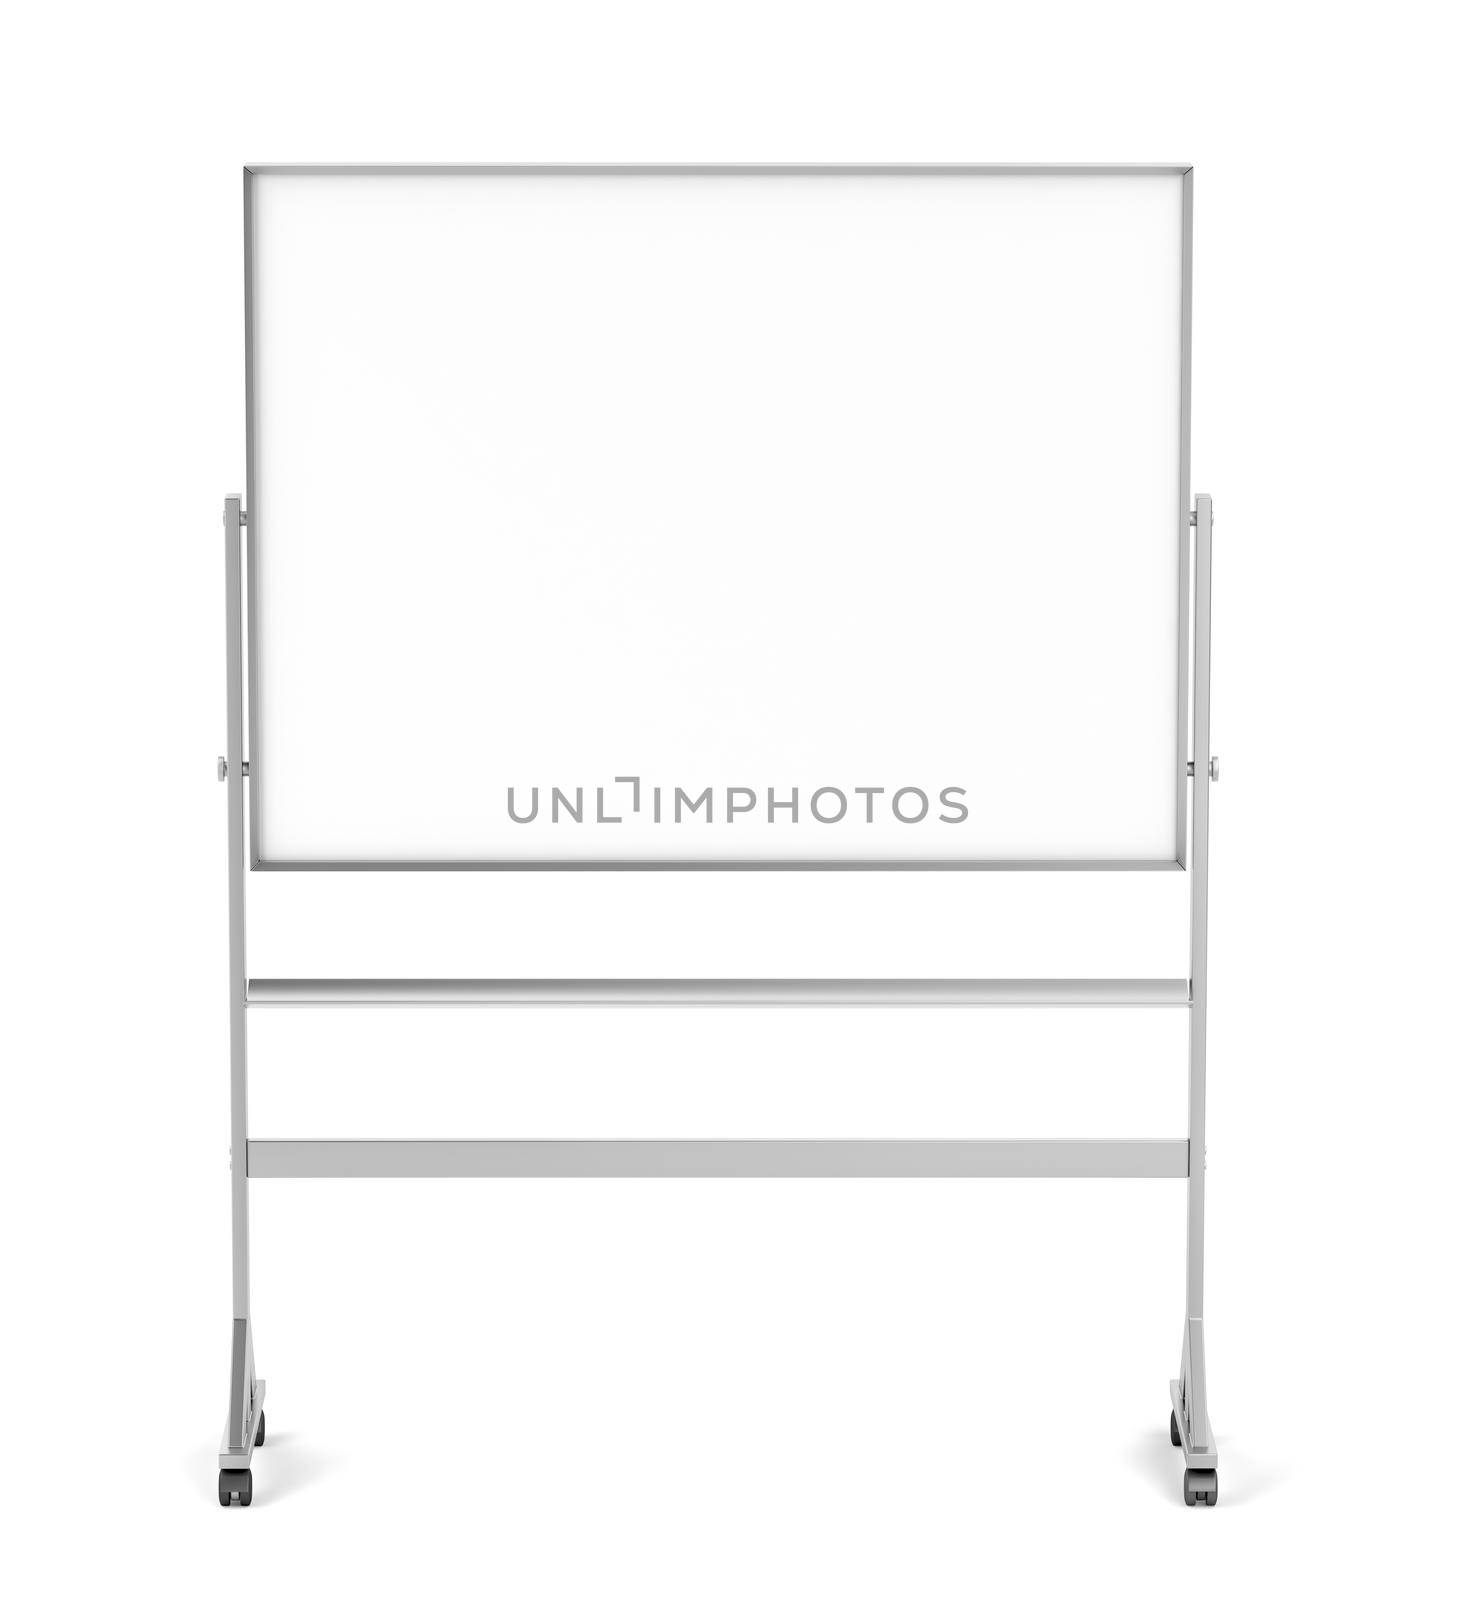 Front view of mobile school whiteboard, isolated on white background